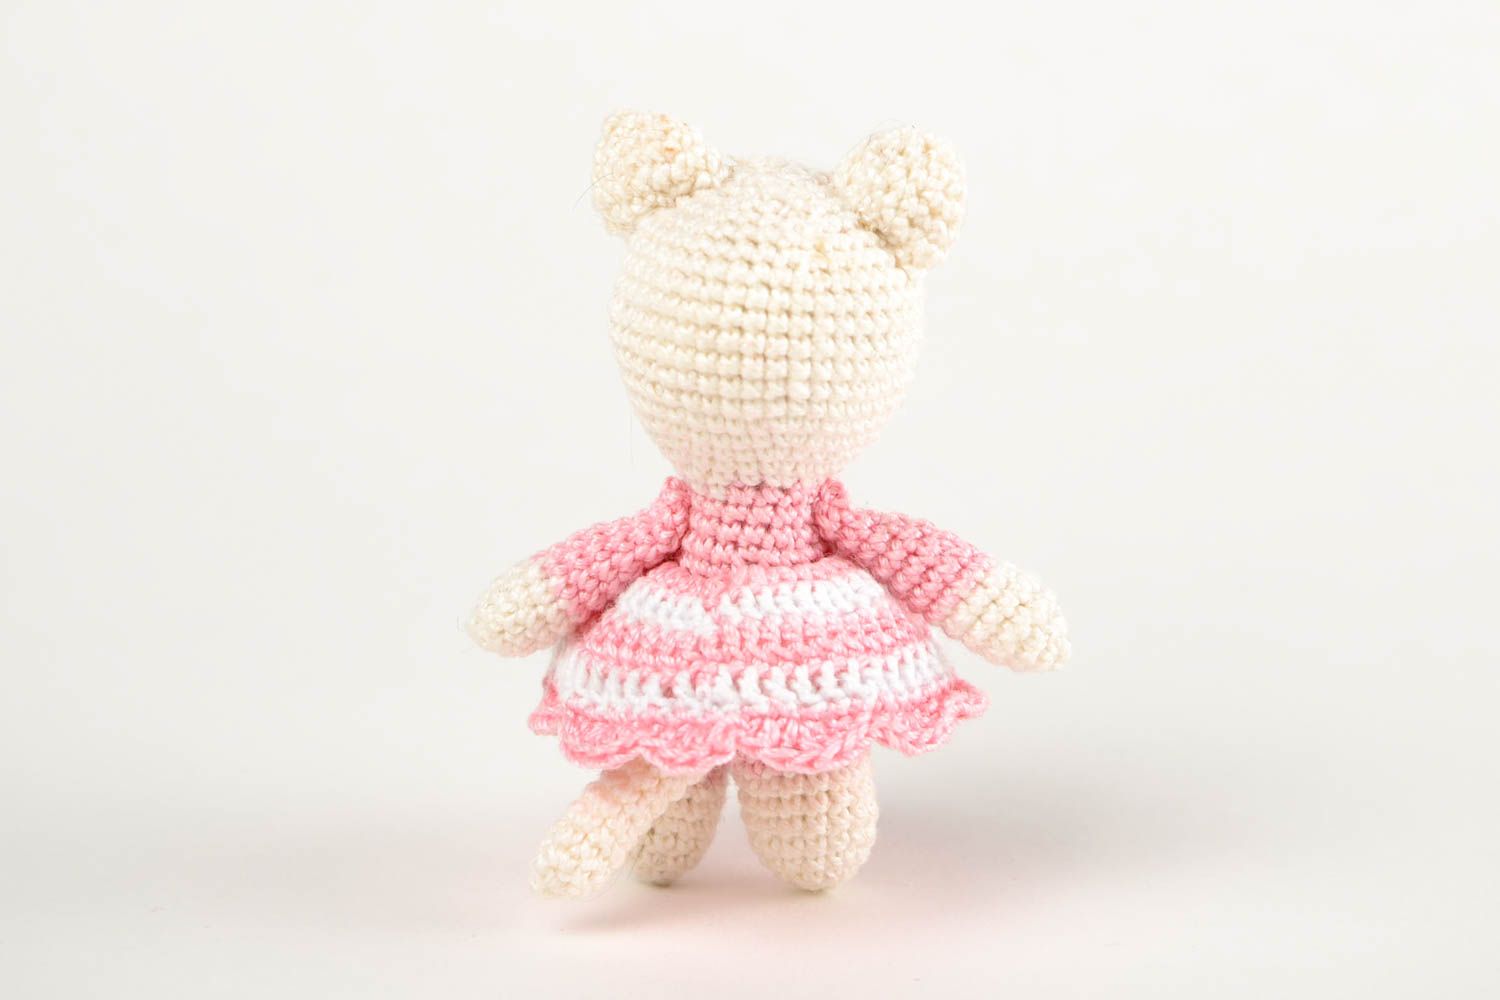 Handmade crocheted toy designer toy unusual toy for kids collectible toy photo 5